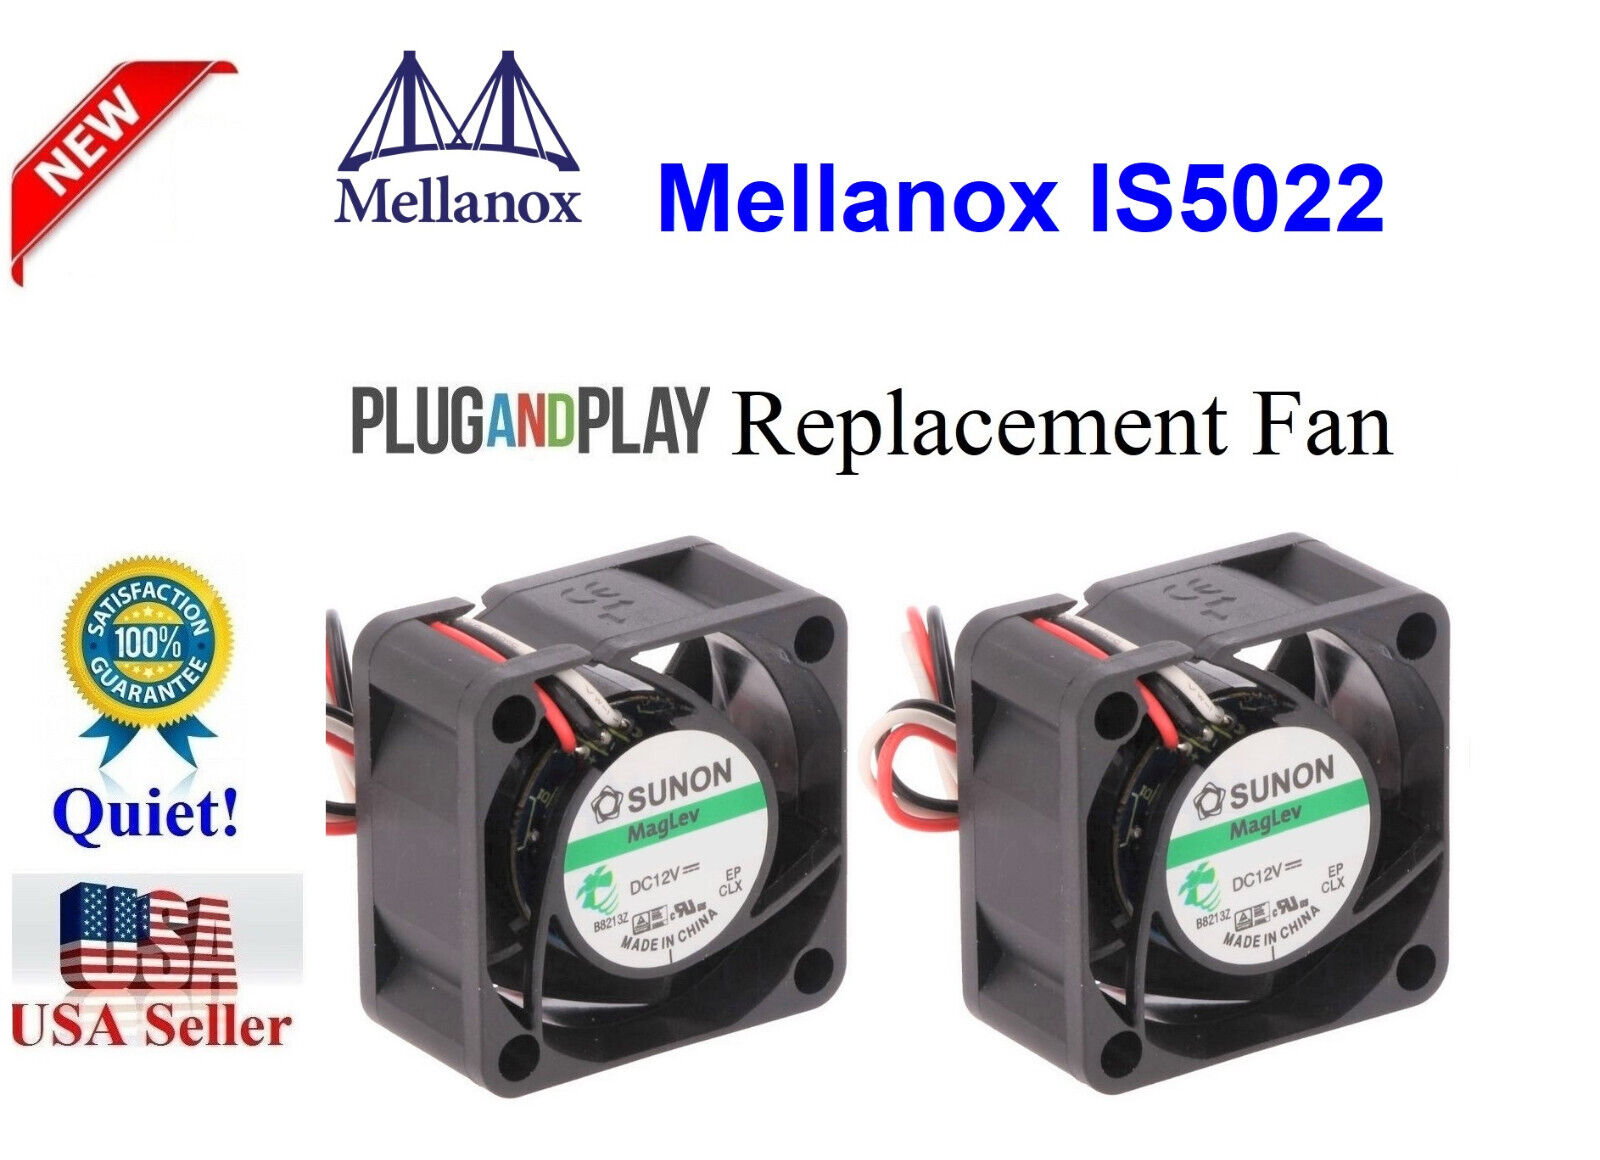 2x Quiet replacement fans for Mellanox IS5022 Switch